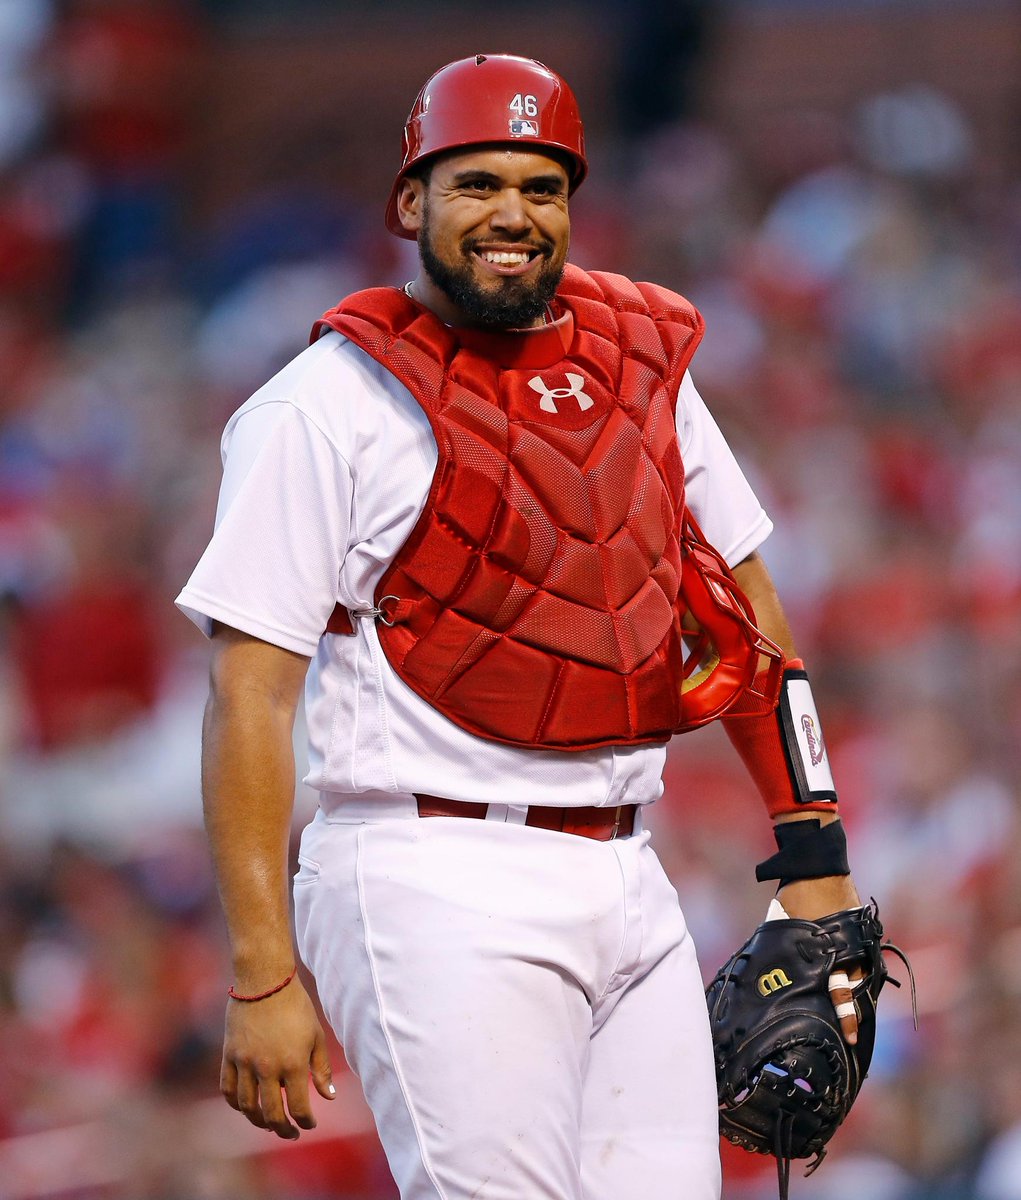 Join us in wishing a Happy 29th Birthday to #STLCards catcher, Francisco Peña! https://t.co/sQDqkDicpq